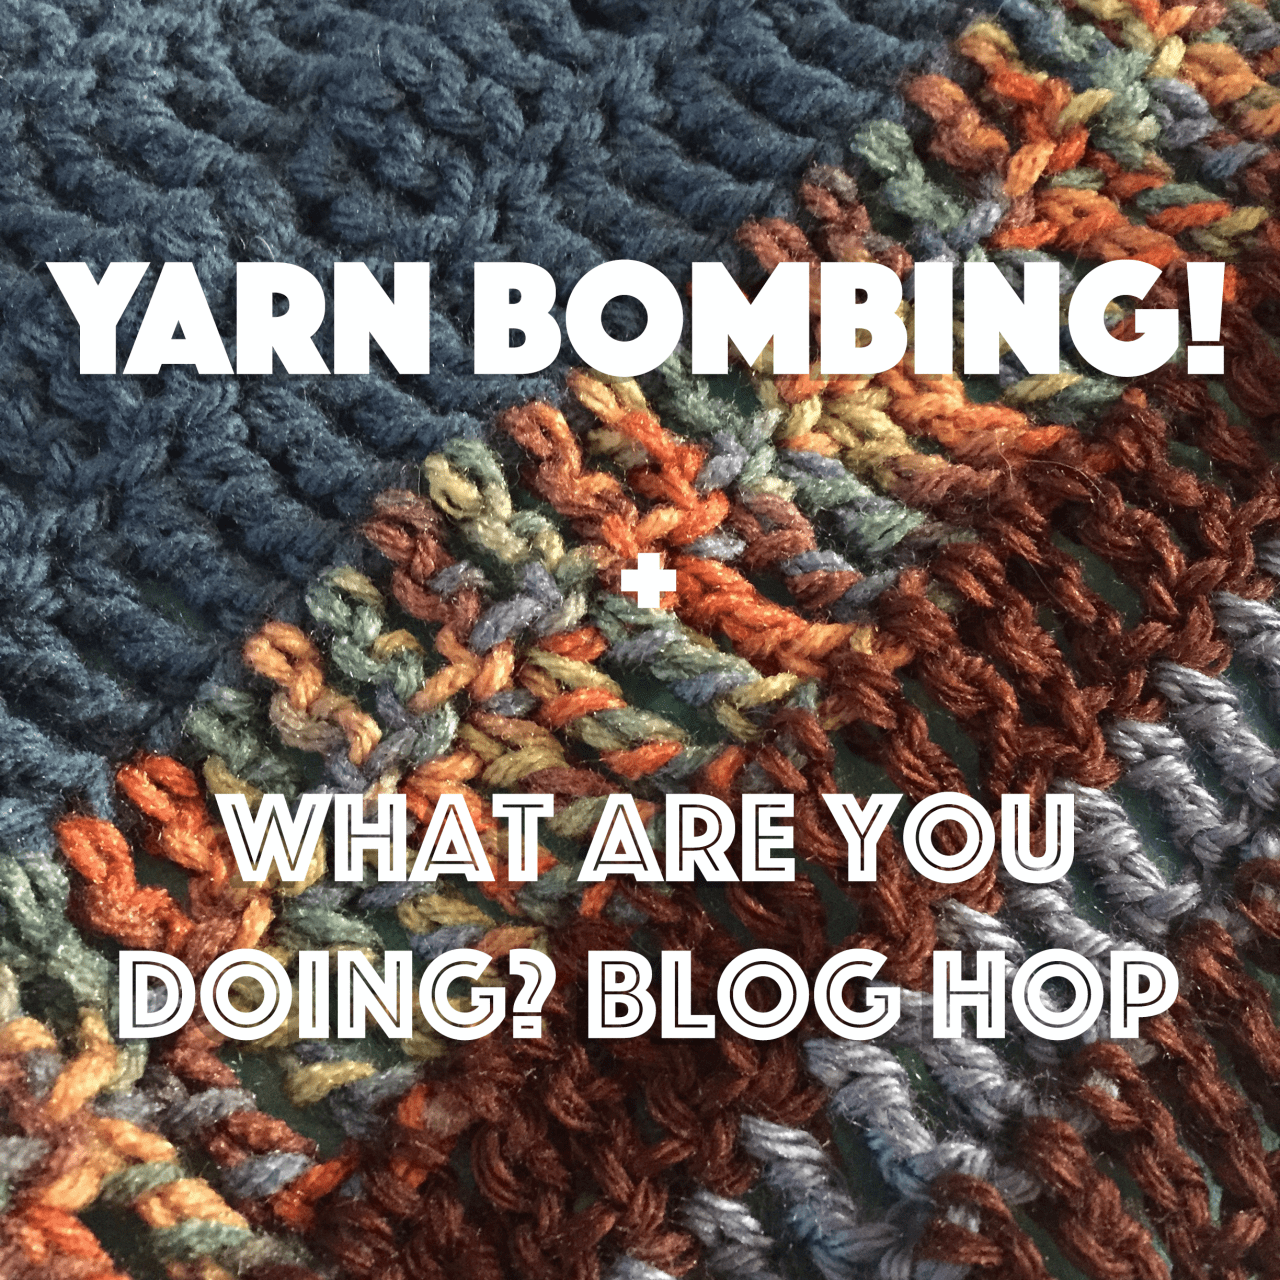 Yarn Bombing + What Are You Doing? Blog Hop #113 on Katie Crafts; https://www.katiecrafts.com